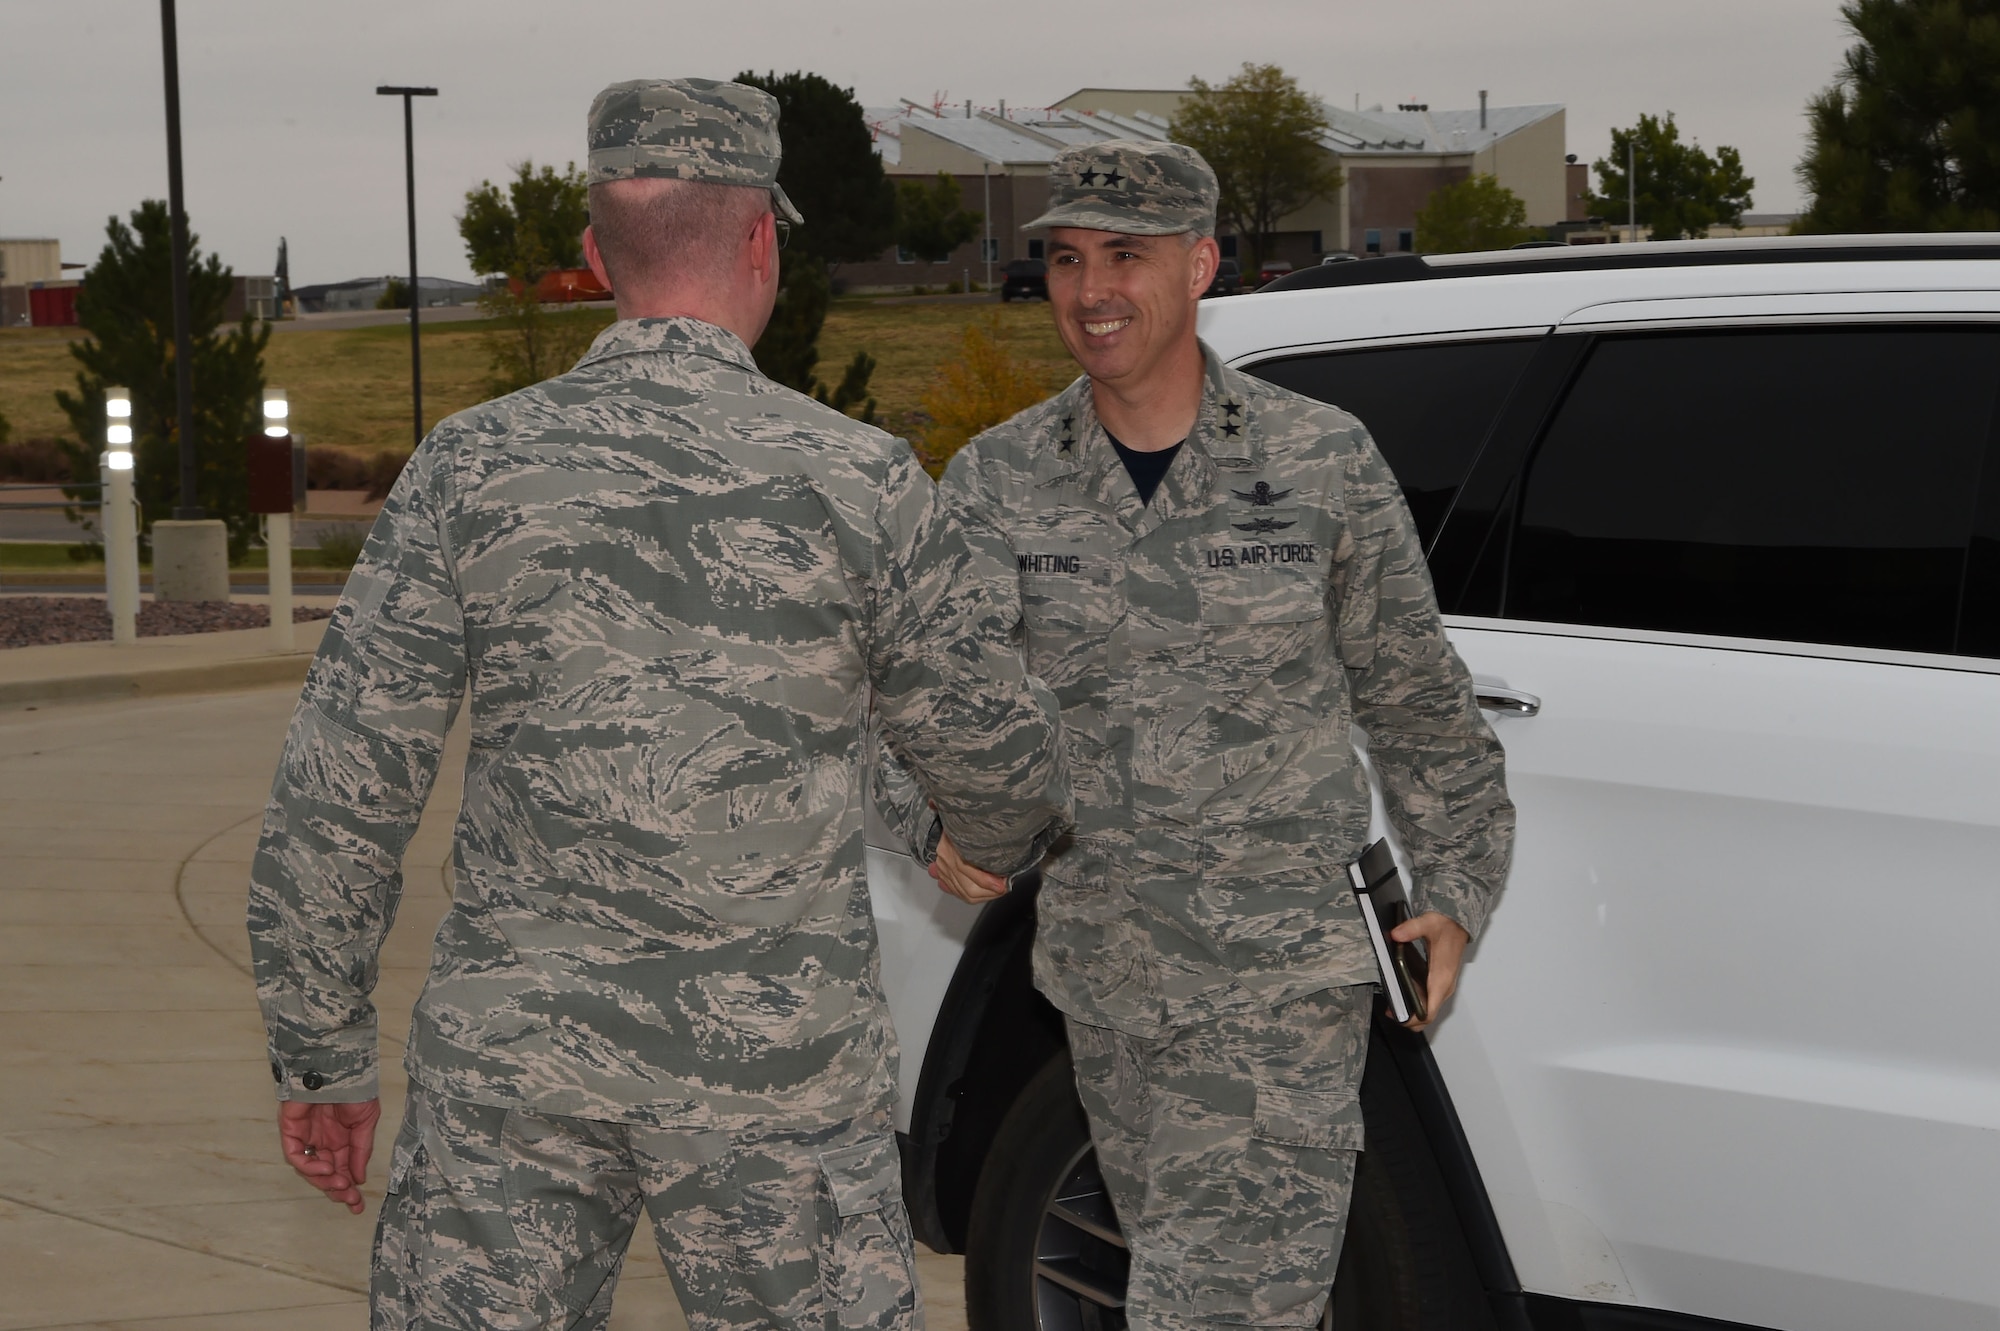 Col. Troy Endicott, 460th Space Wing commander, greets Maj. Gen. Stephen Whiting, 14th Air Force commander, Air Force Space Command, Sept. 28, 2018, on Buckley Air Force Base, Colorado. Whiting leads approximately 16,000 members responsible for providing strategic missile warning, nuclear command, control and communication, position, navigation and timing, space situational awareness, satellite operations, space launch and range operations. (U.S. Air Force photo by Senior Airman Codie Collins)